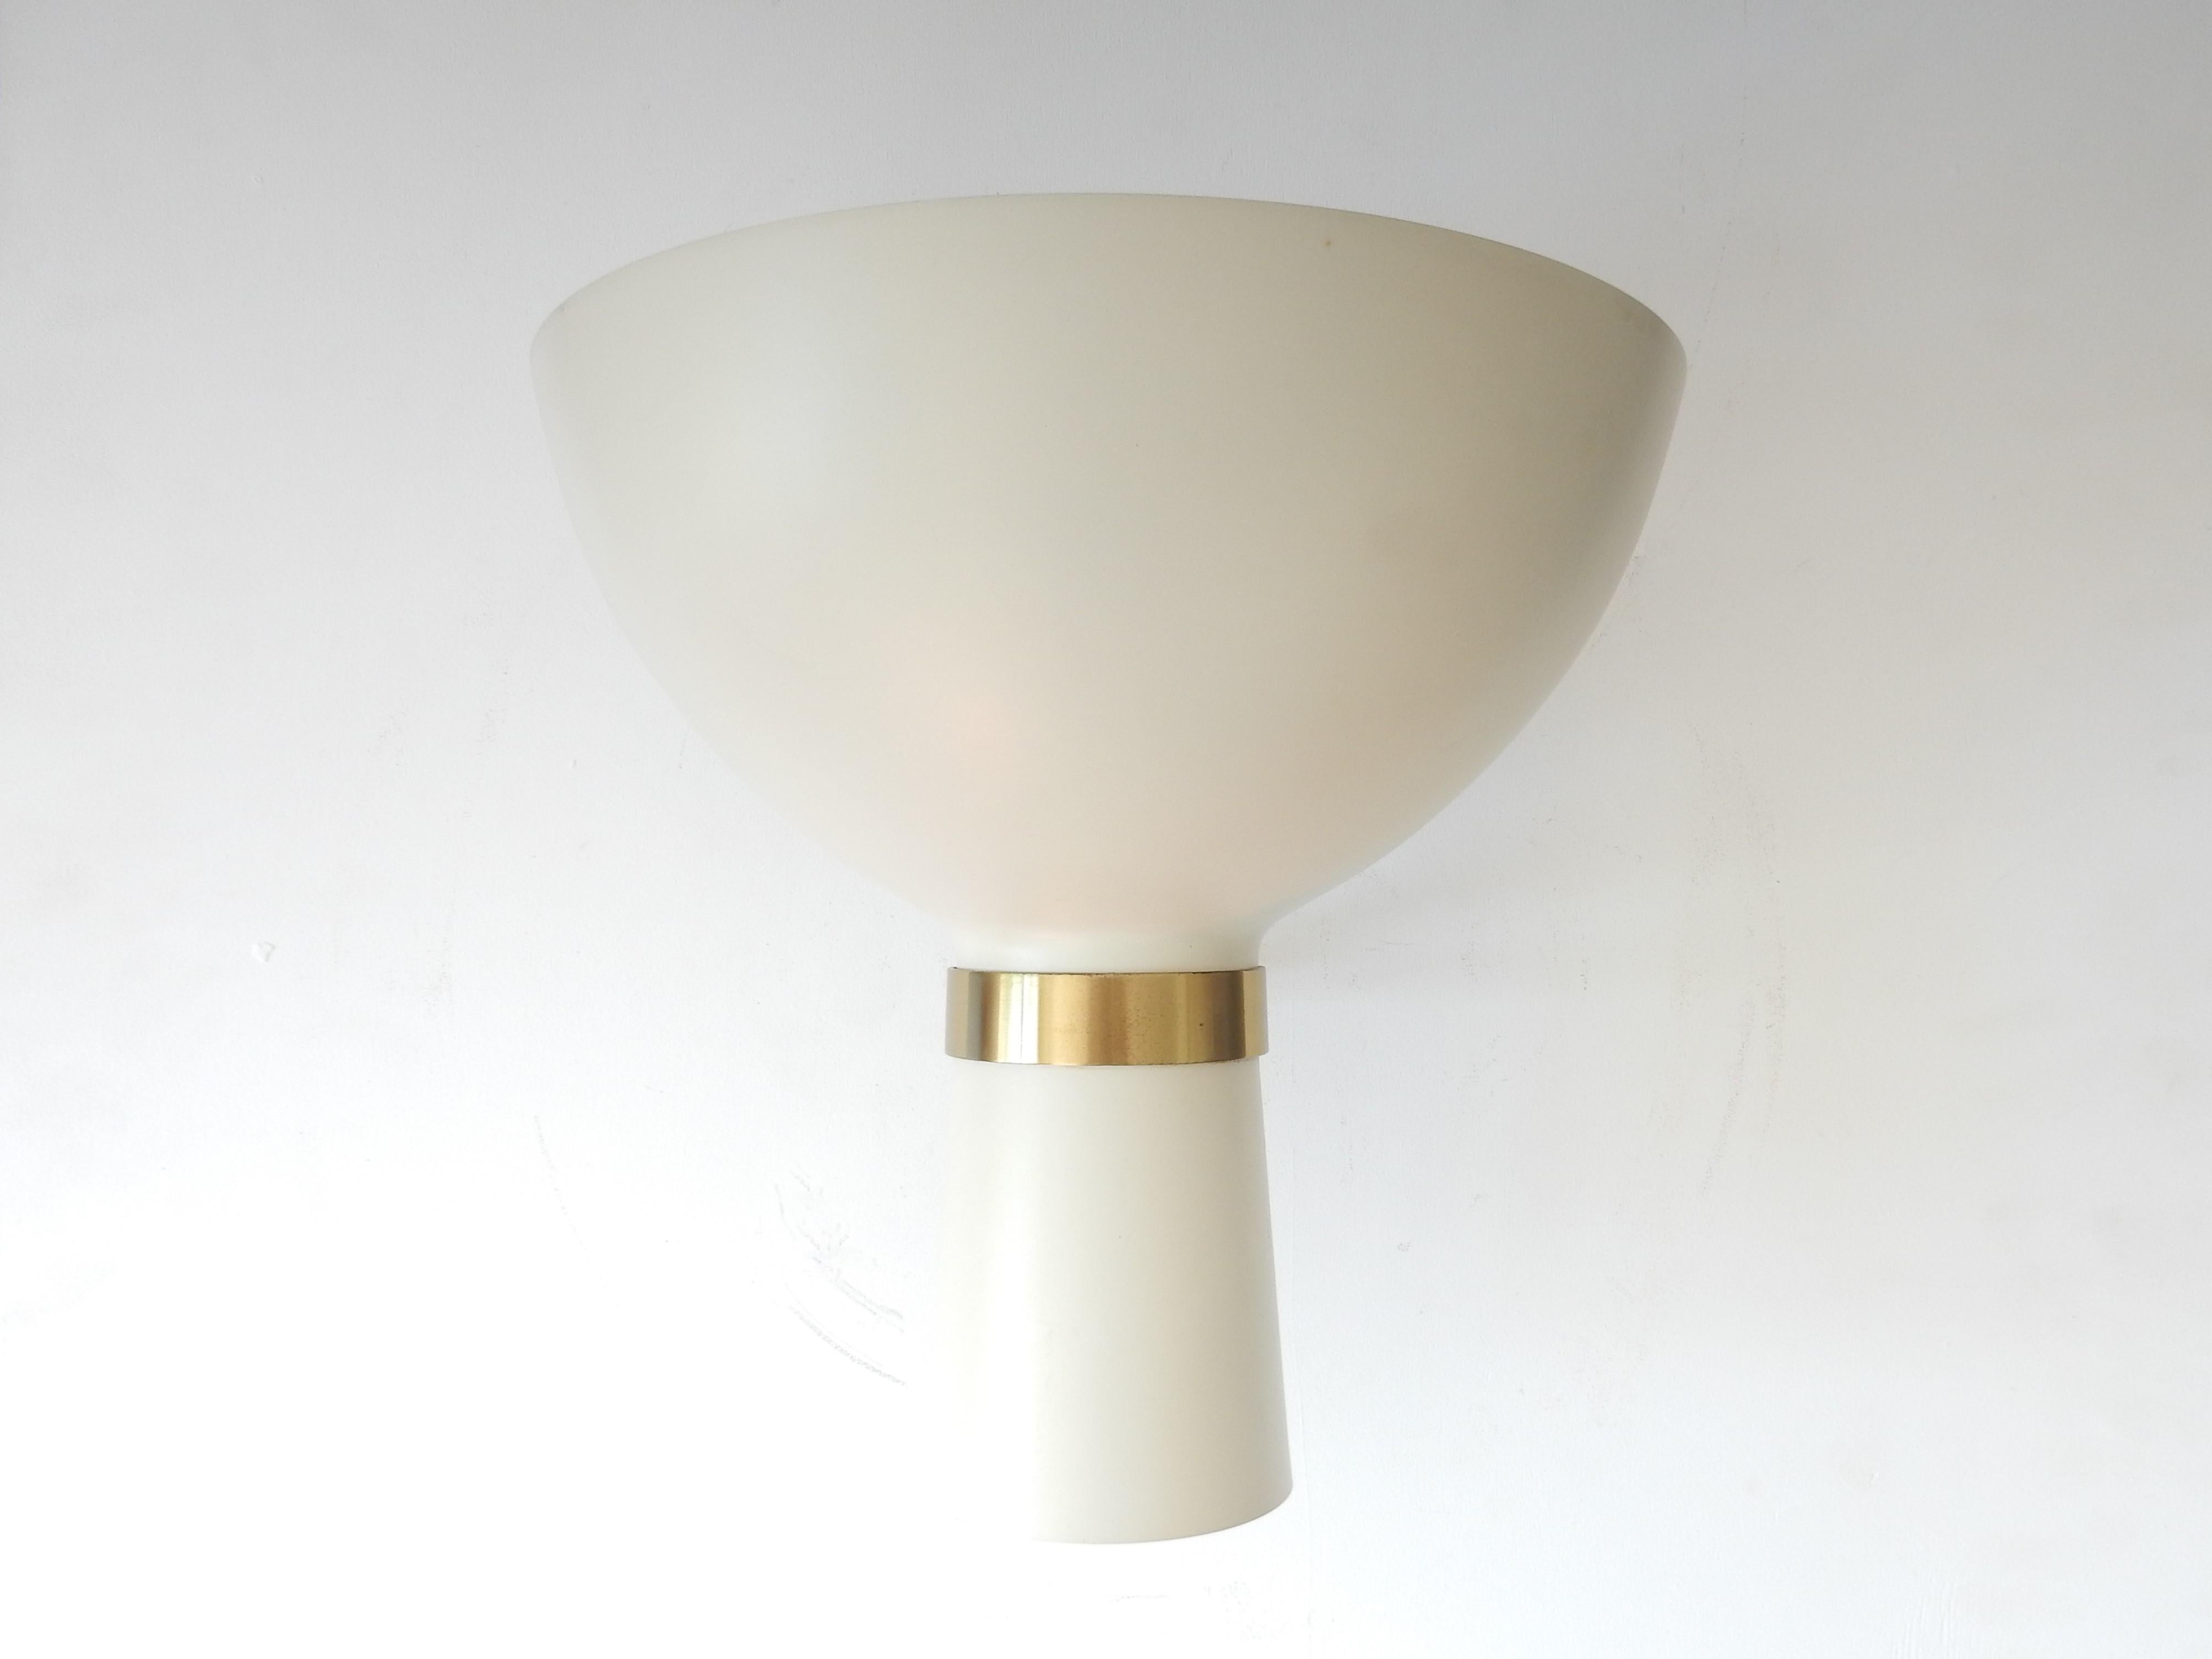 This amazing wall lamp in diabolo shape is often attributed to Stilnovo from Italy. It was sold in the Netherlands by the high end lighting importer 'Indoor'. We have it in one of their catalogues from the 1960s. It has a cream-white lacquered shade